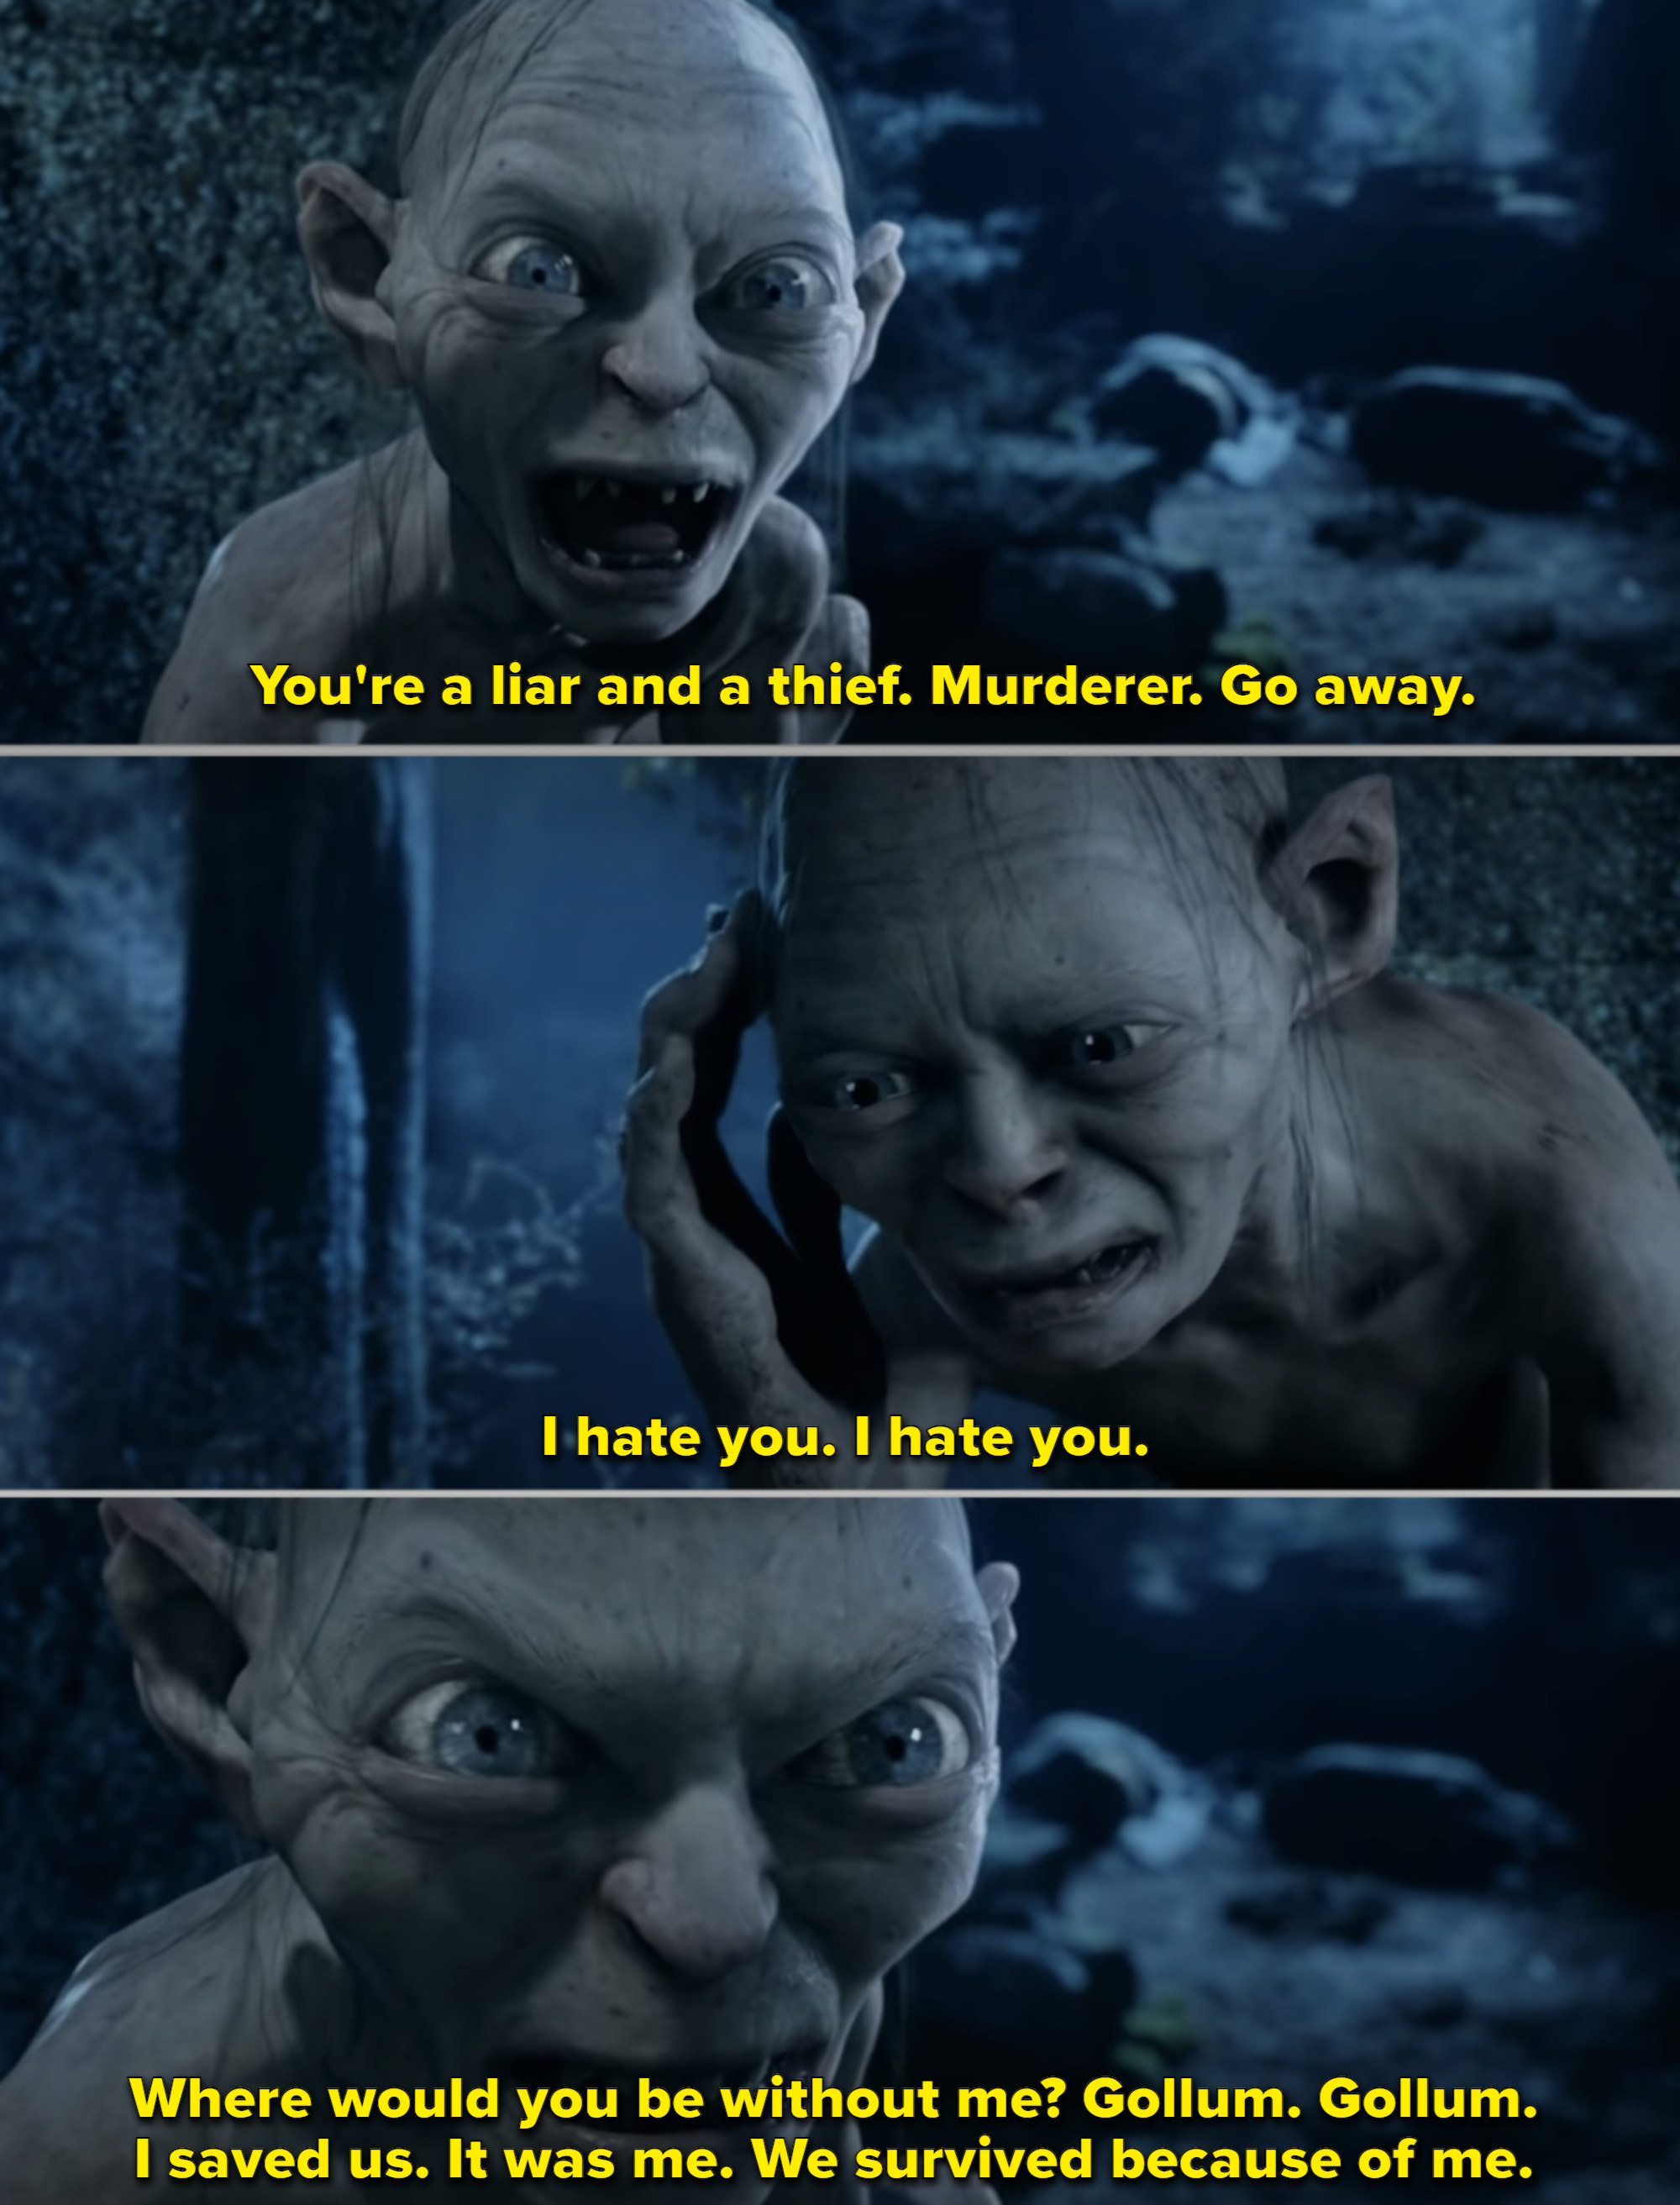 Gollum and Smeagol talking back to each other